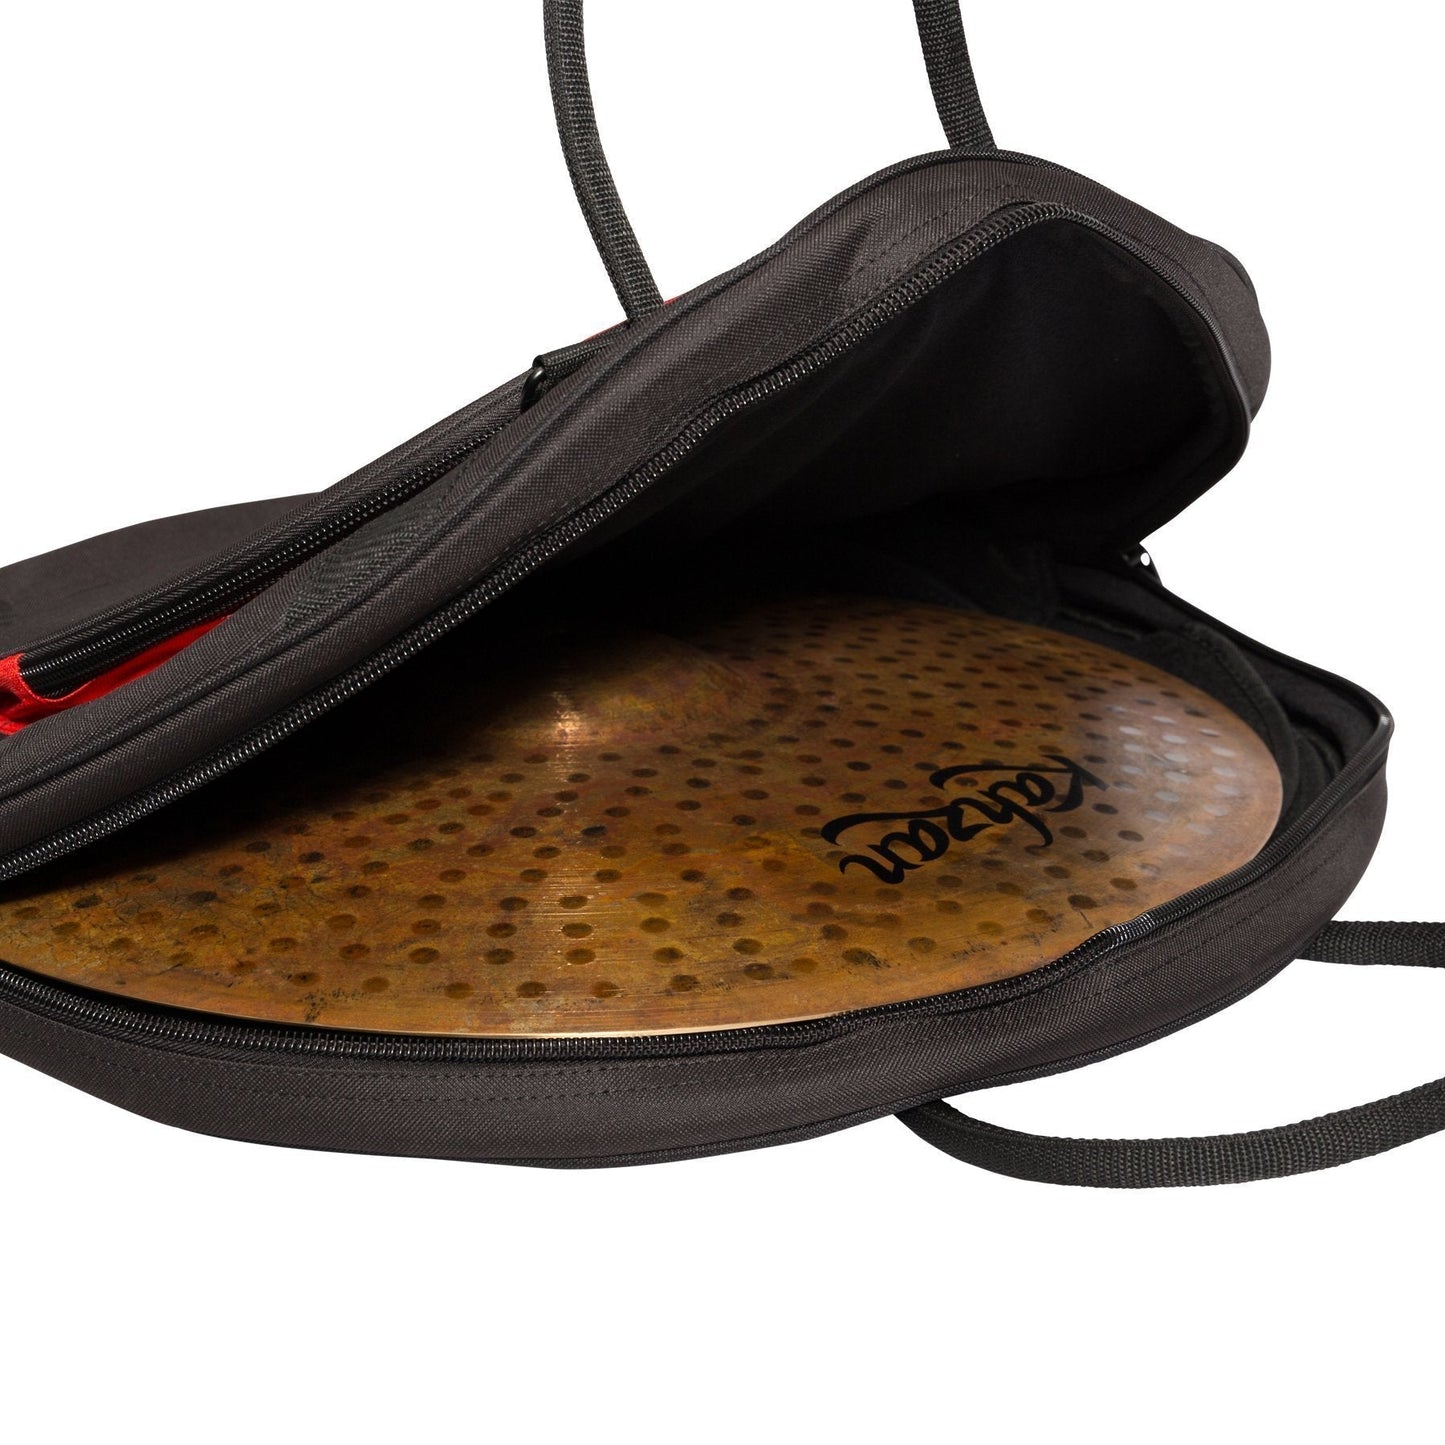 Load image into Gallery viewer, Sonic Drive Deluxe Cymbal Bag (Black with Red)
